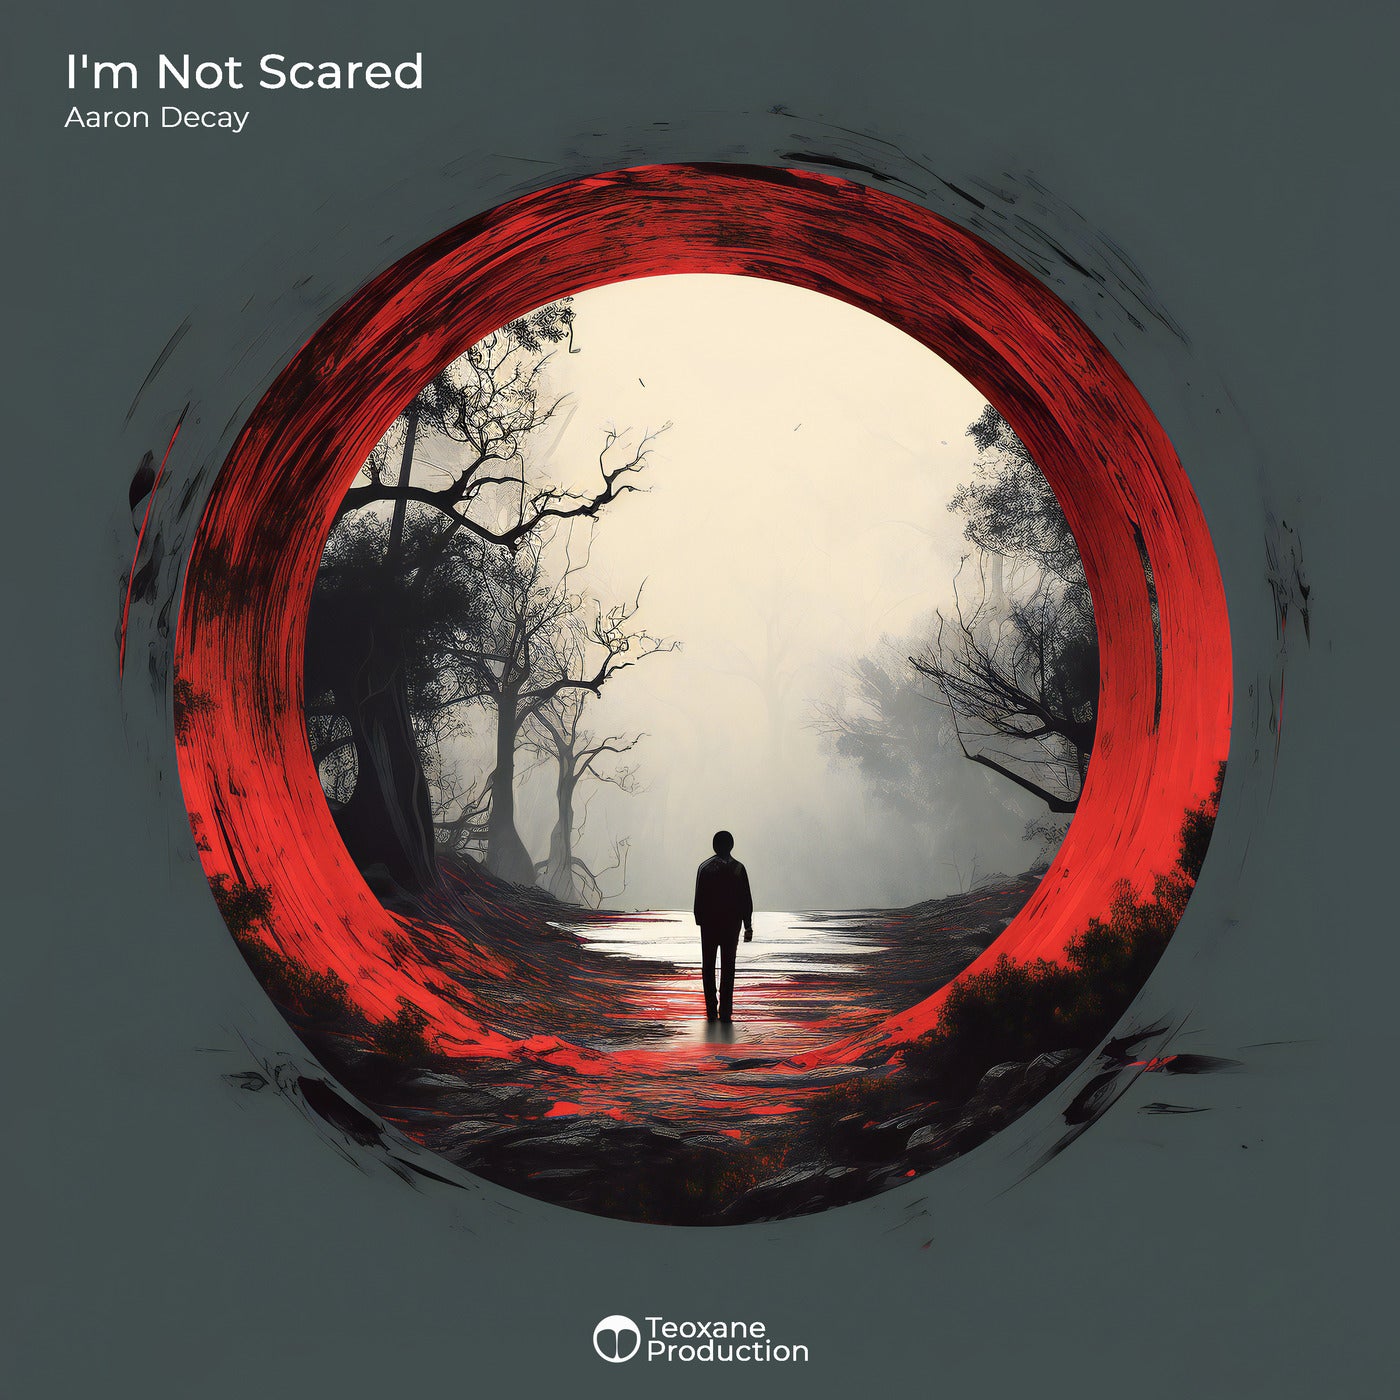 I'm Not Scared